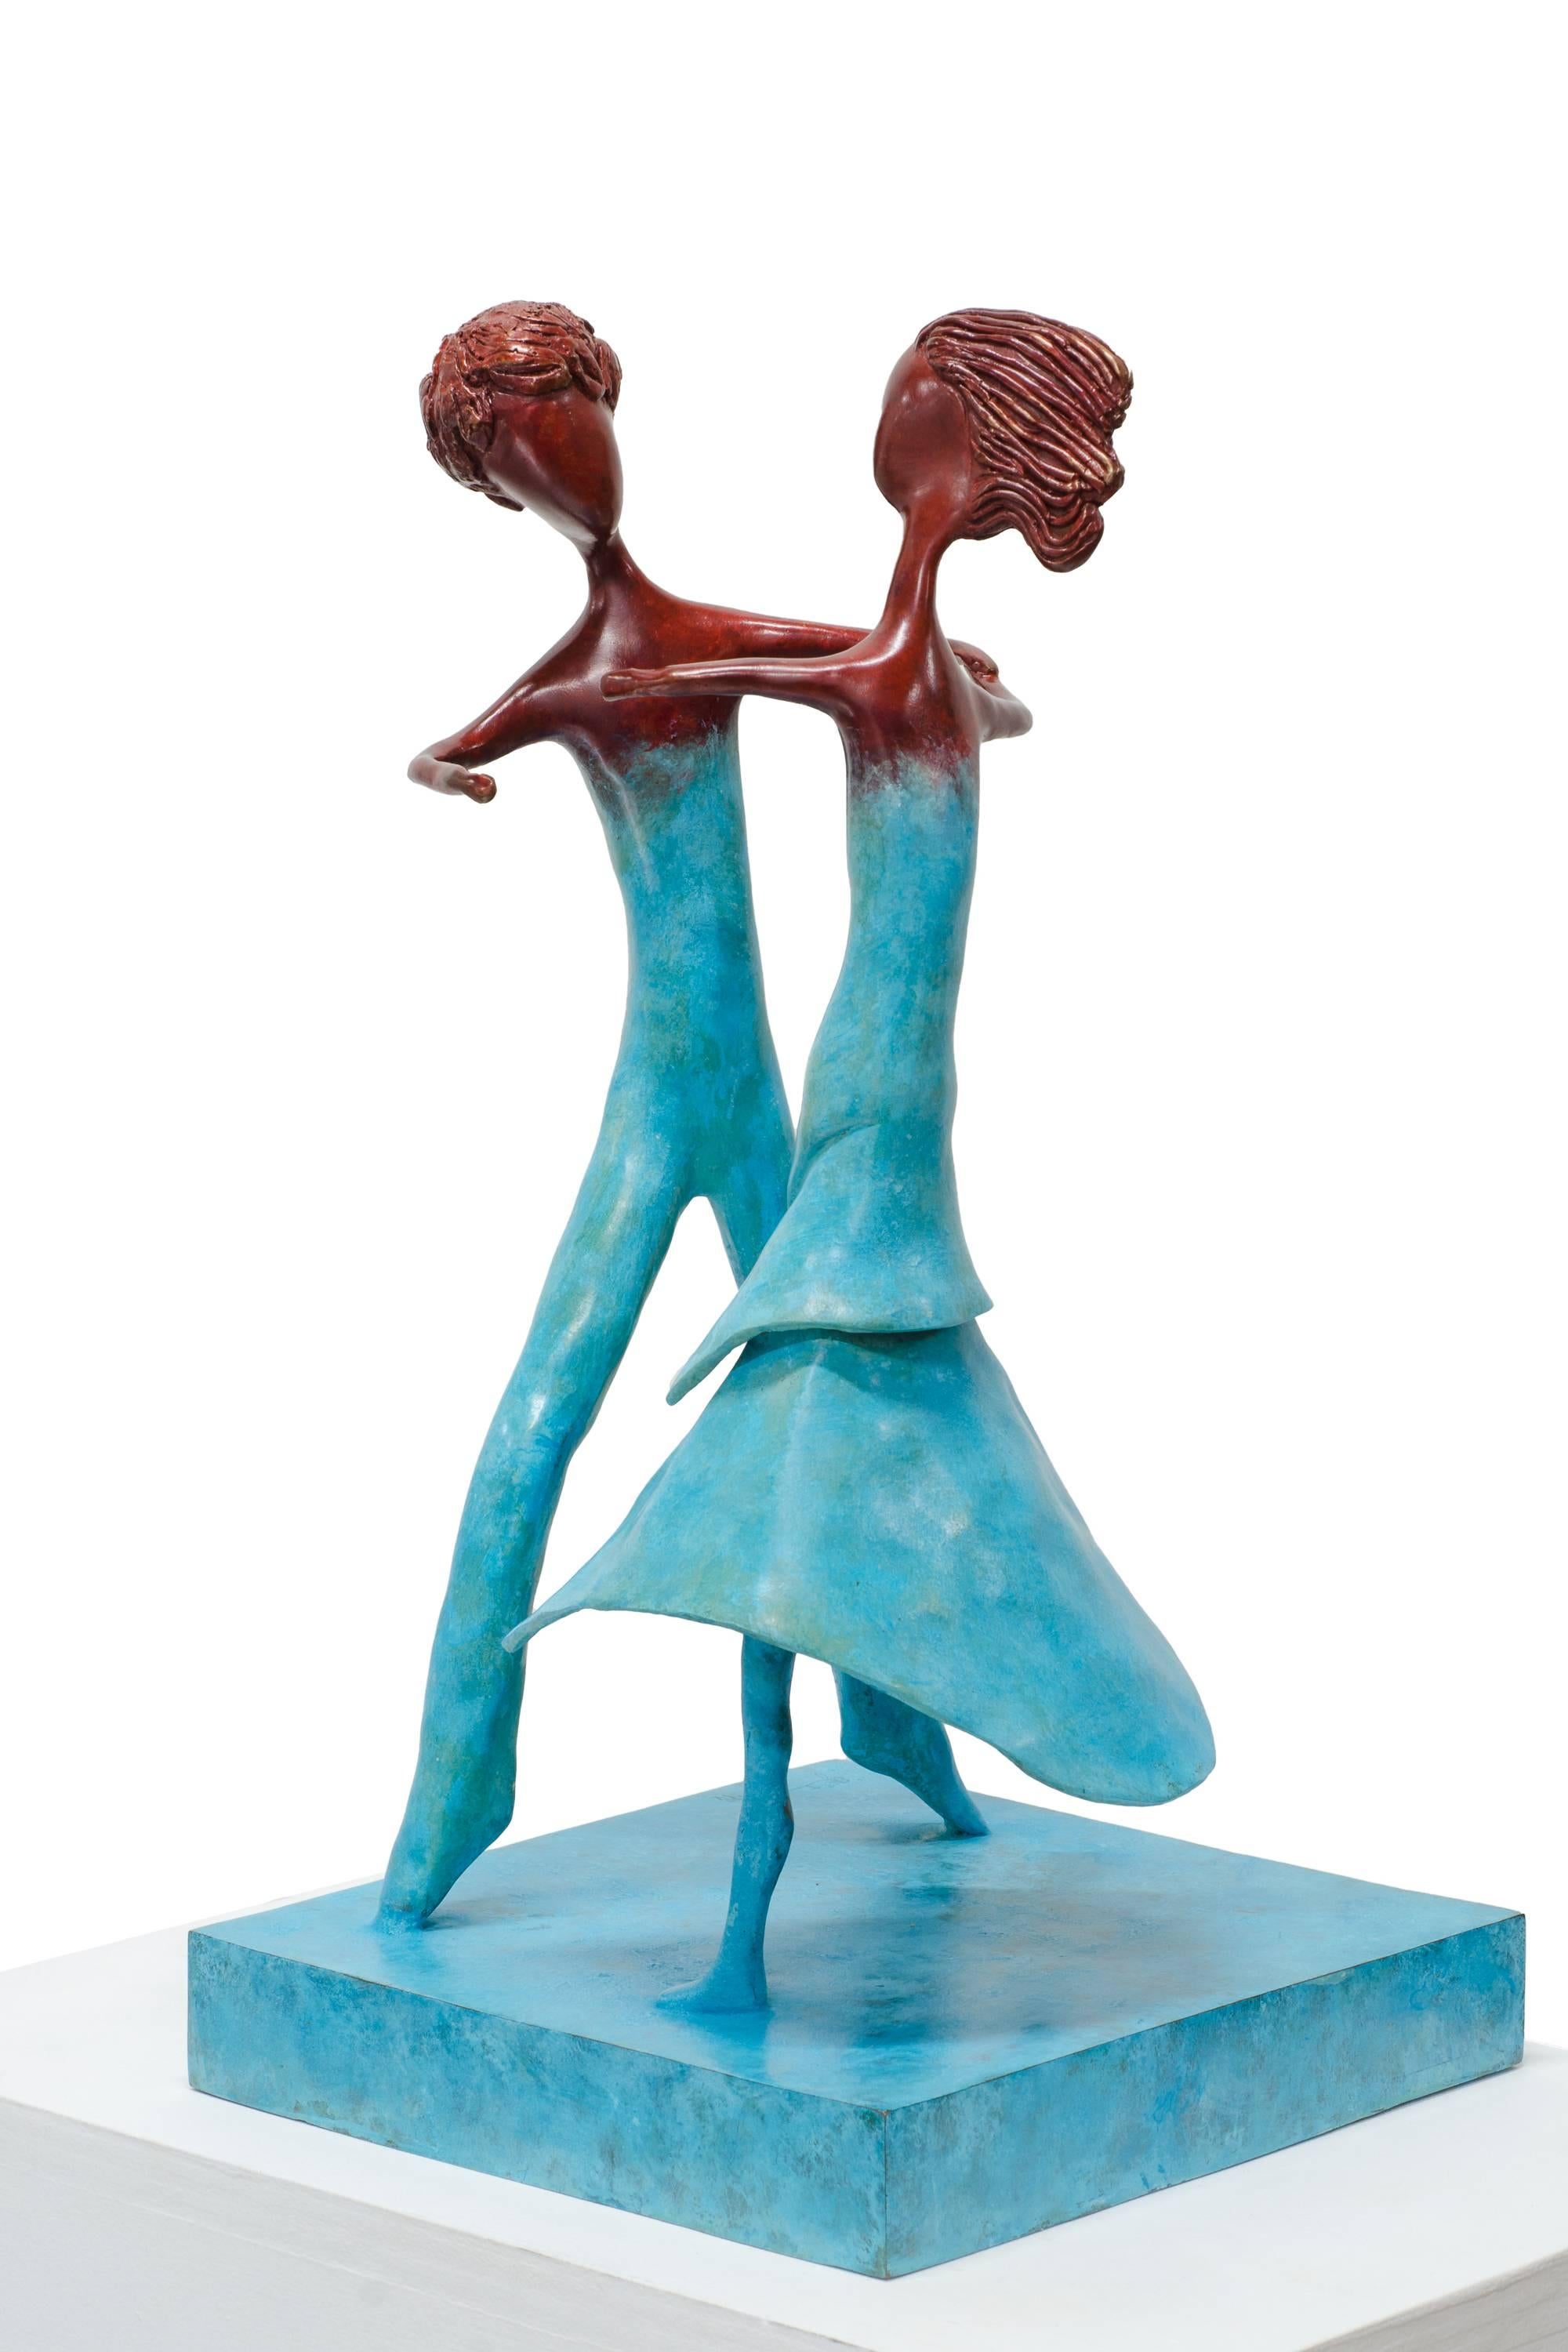 Beatriz Gerenstein Abstract Sculpture - Falling in Love. Are they dancing? no, they are in their own world